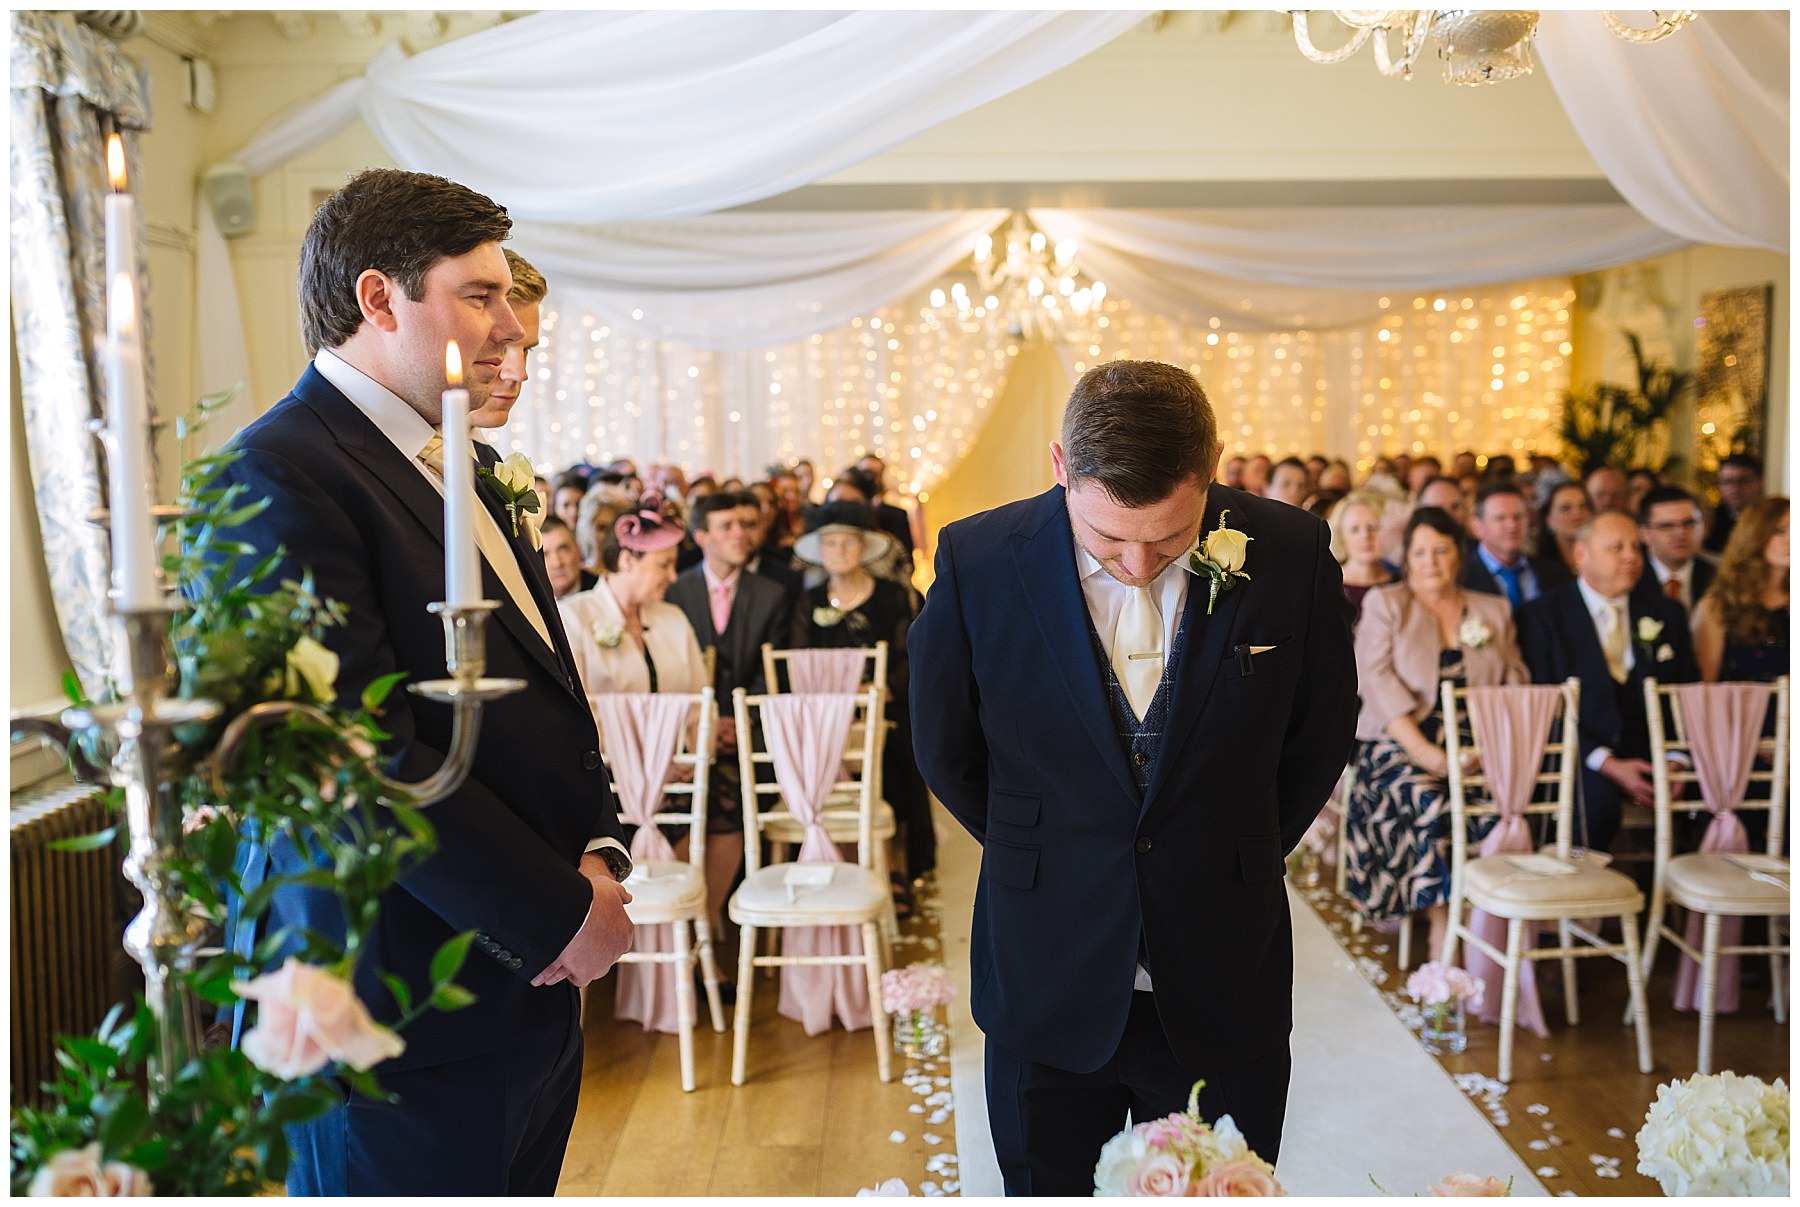 Groom waits nervously for bride in Eaves hall wedding ceremony room